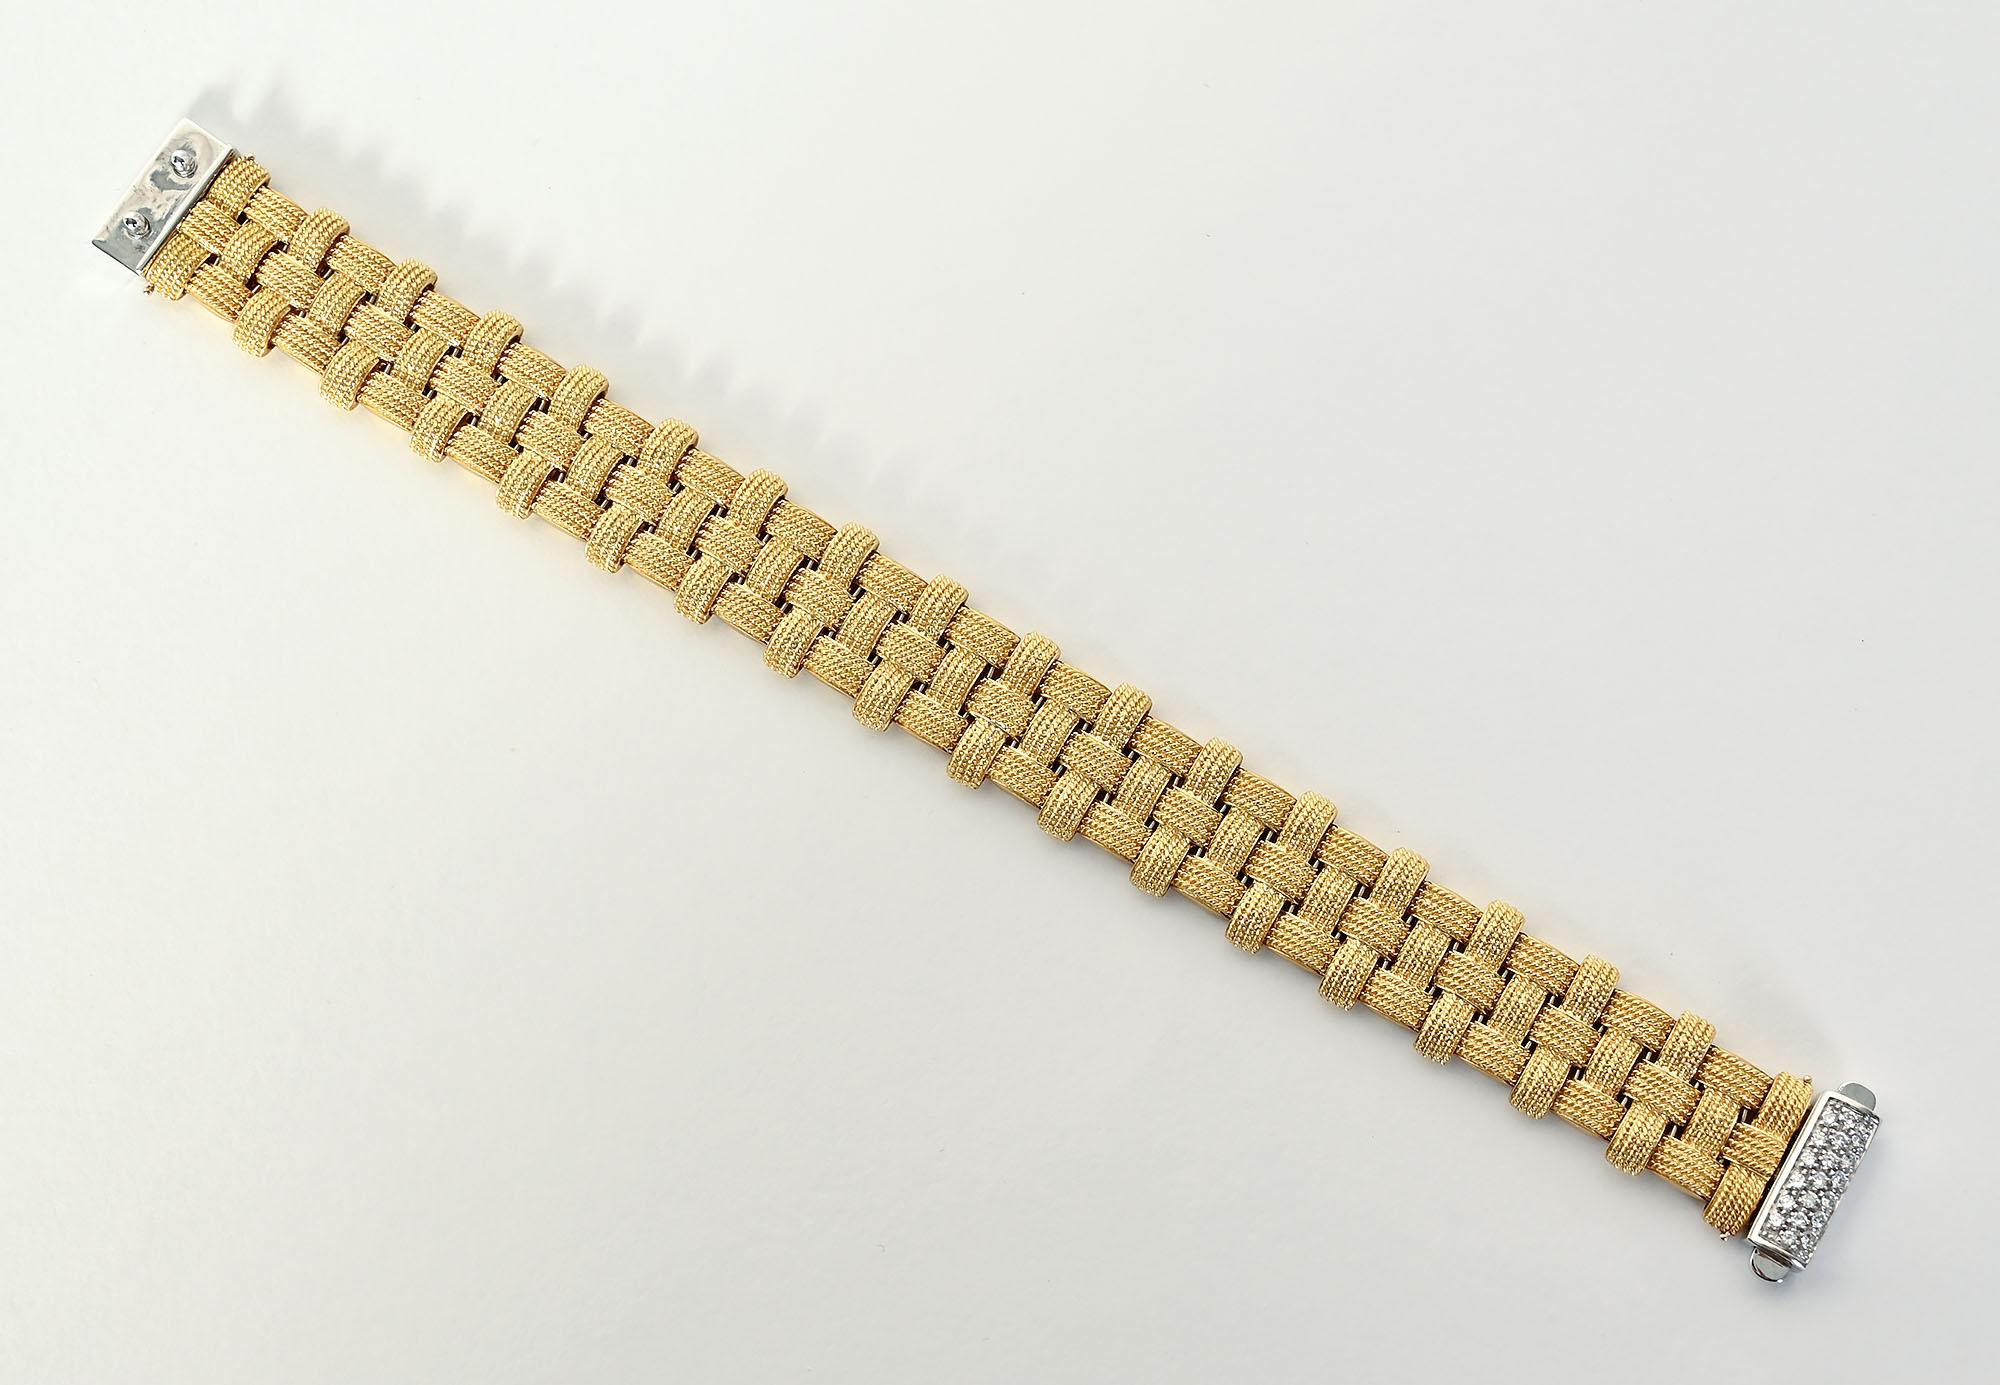 Roberto Coin bracelet with a triple row of woven gold from his iconic Appassionata collection. The bracelet is 9/16